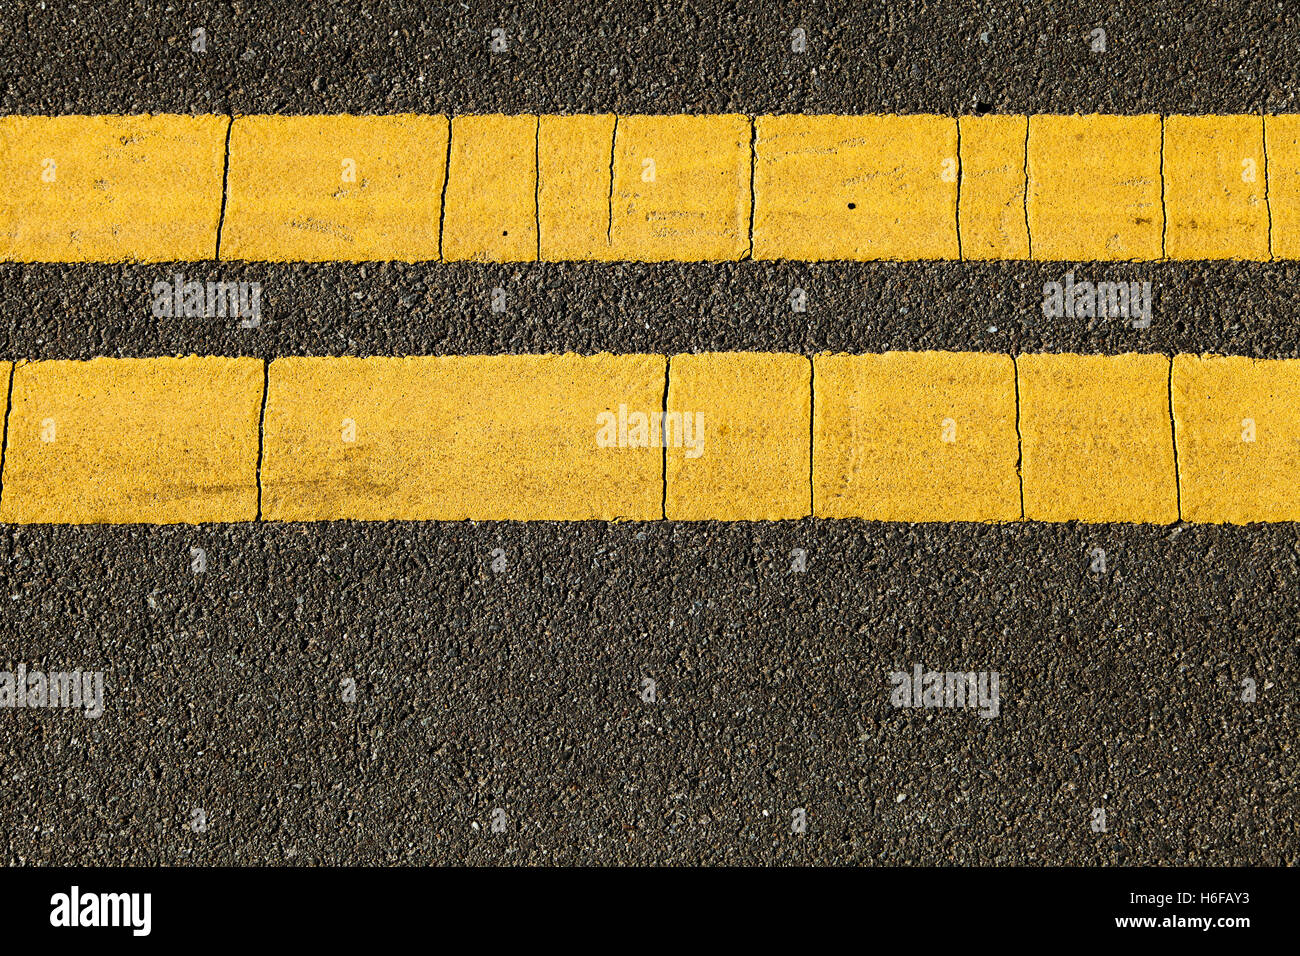 Detail view of asphalt road with yellow line markings on it. Stock Photo